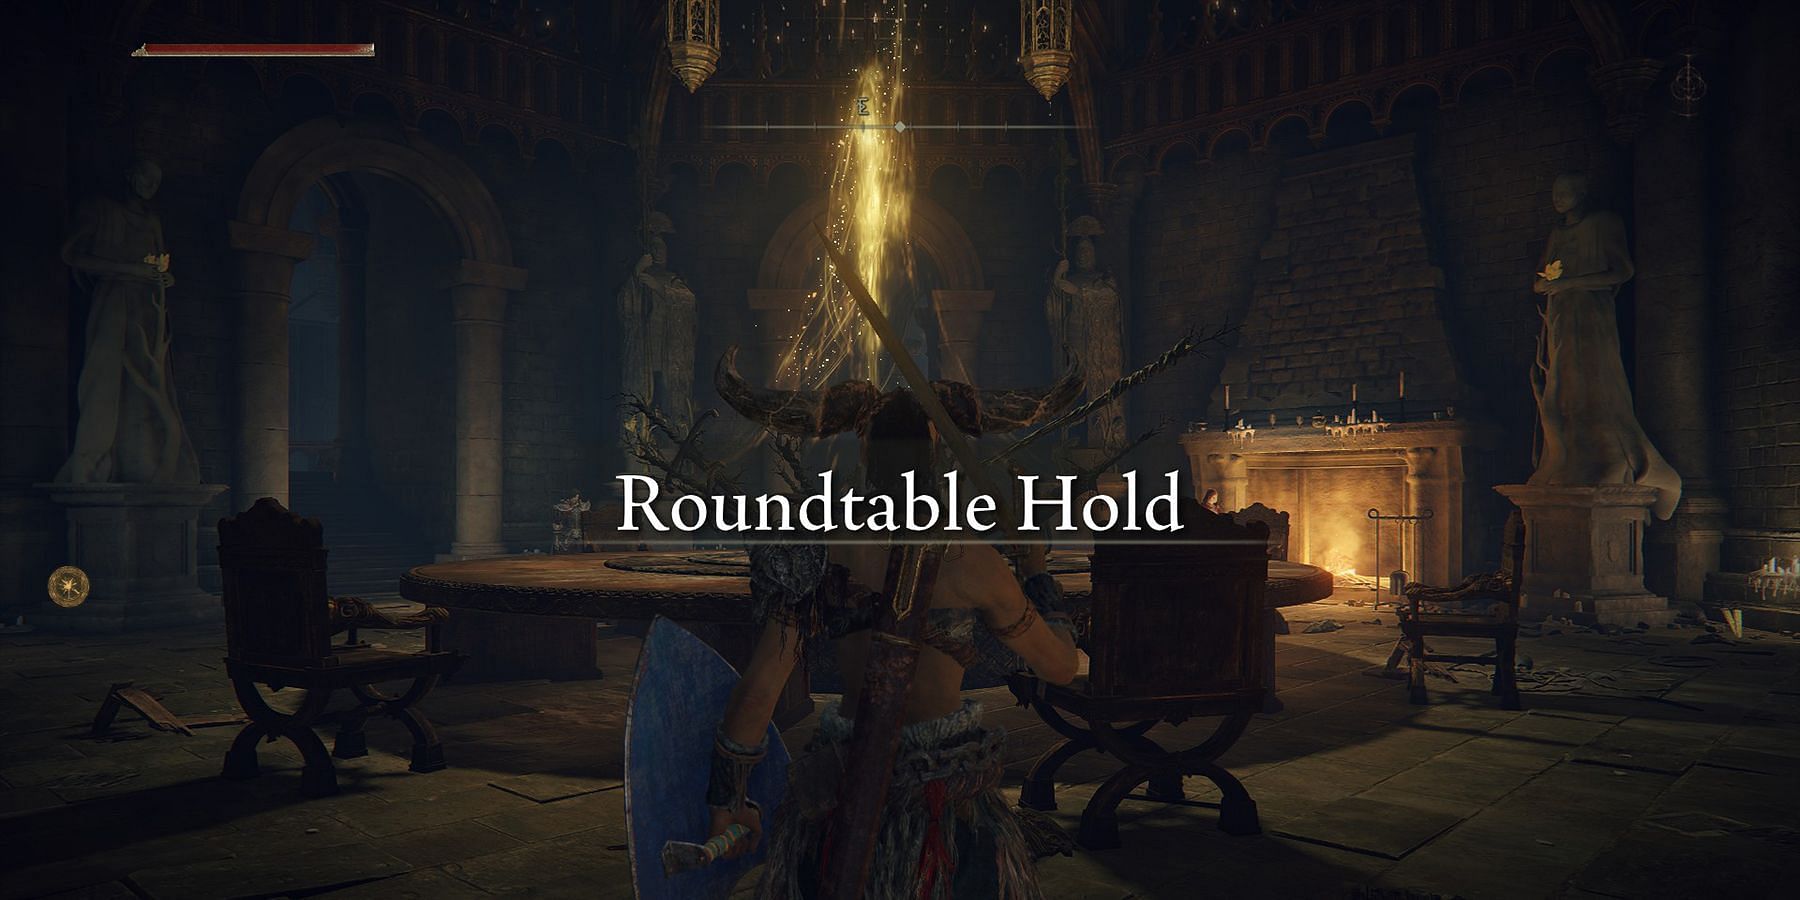 A player arrives at Roundtable Hold in Elden Ring (Image via FromSoftware Inc.)